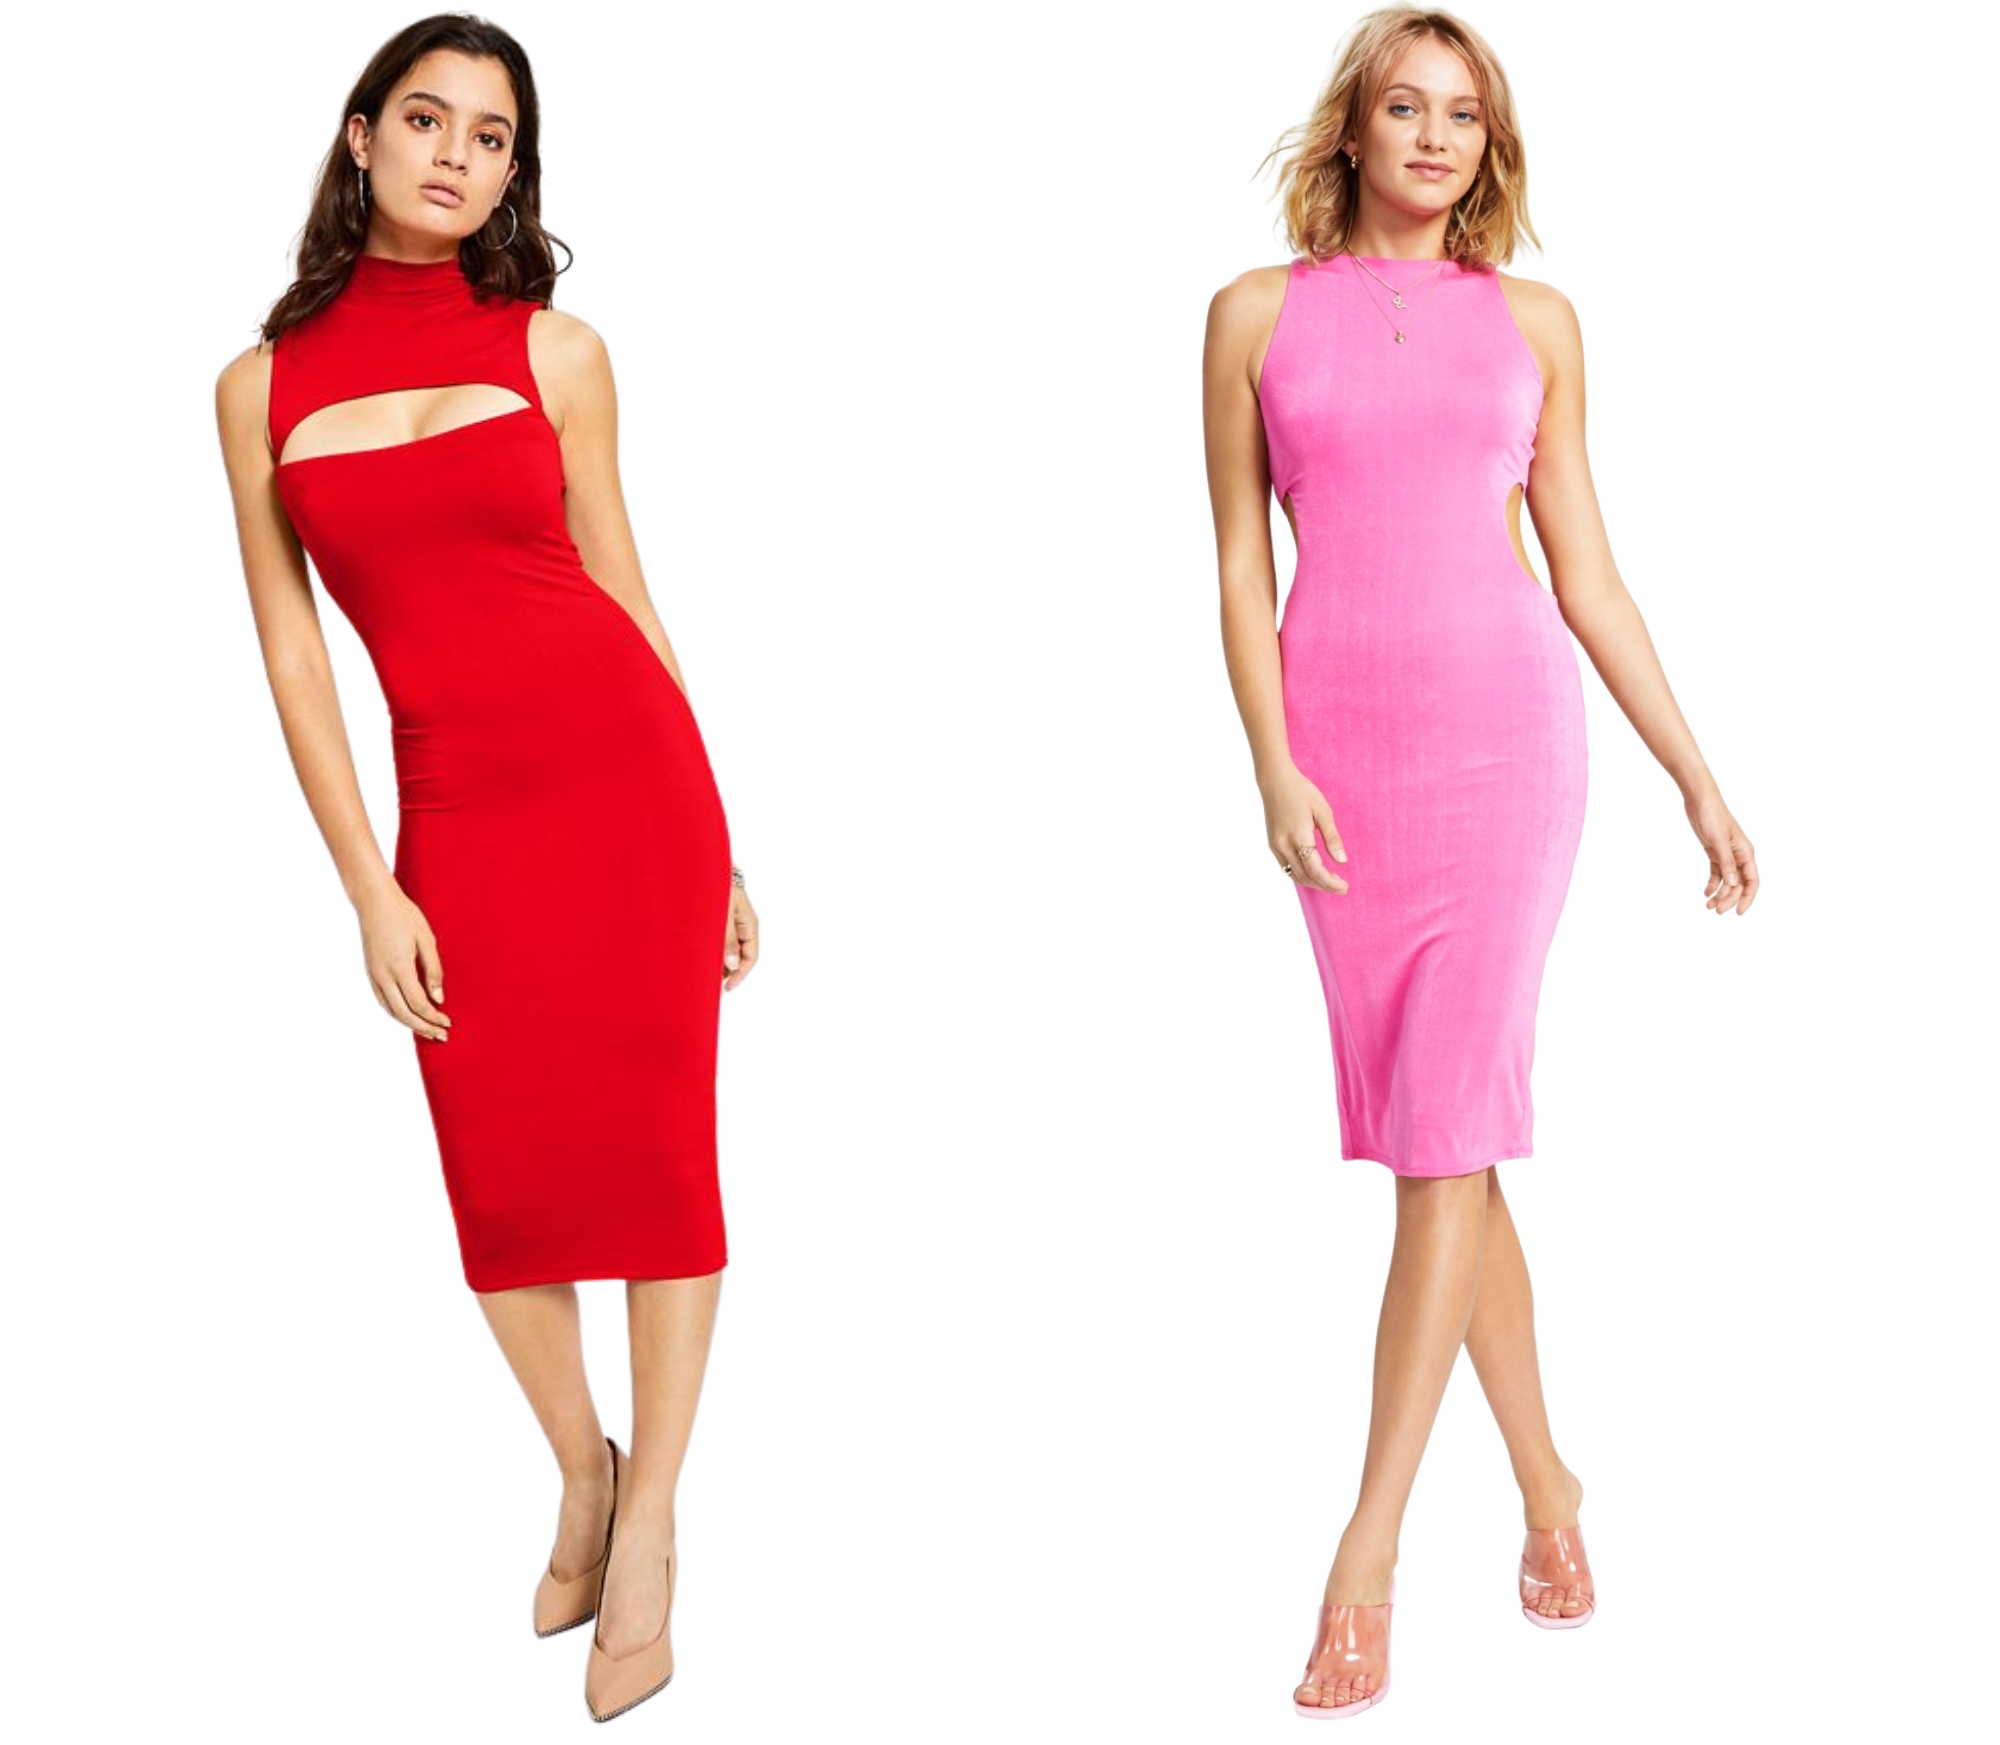 10 Style Tips To Look Fabulous In A Bar III Bodycon Dress - Tagsweekly